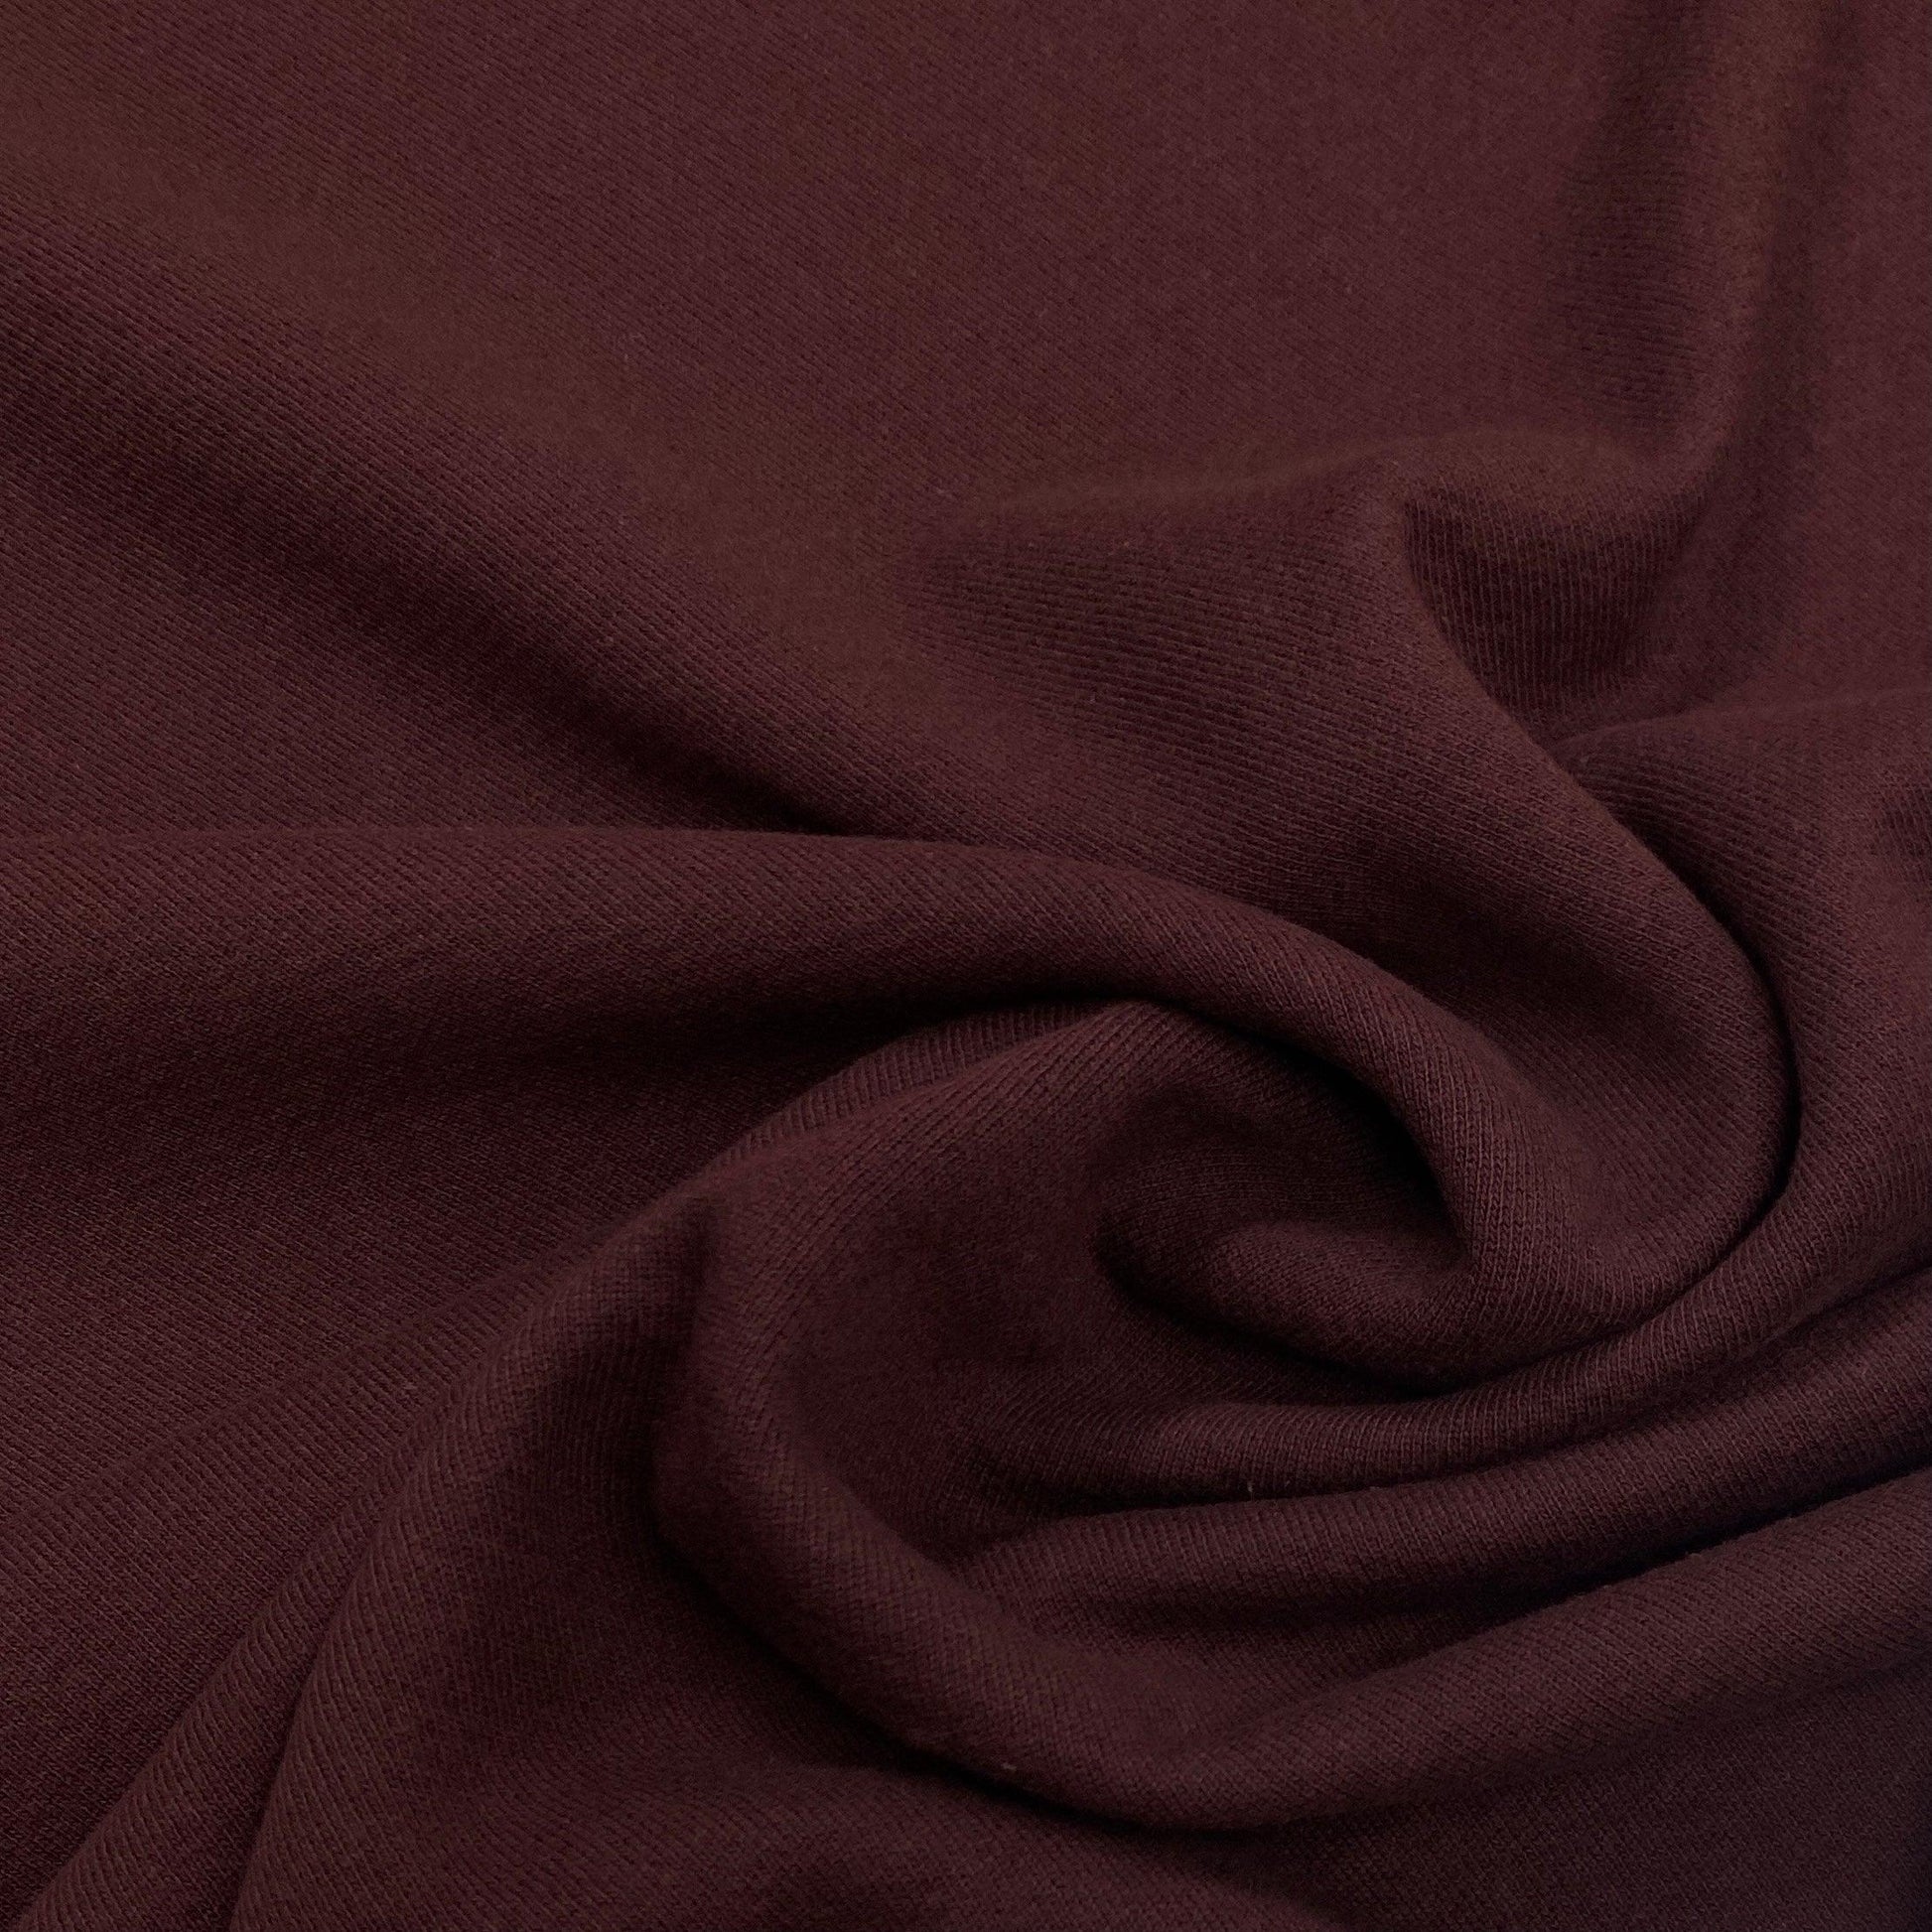 Oxblood Heavy Organic Cotton French Terry Fabric - Grown in the USA - Nature's Fabrics